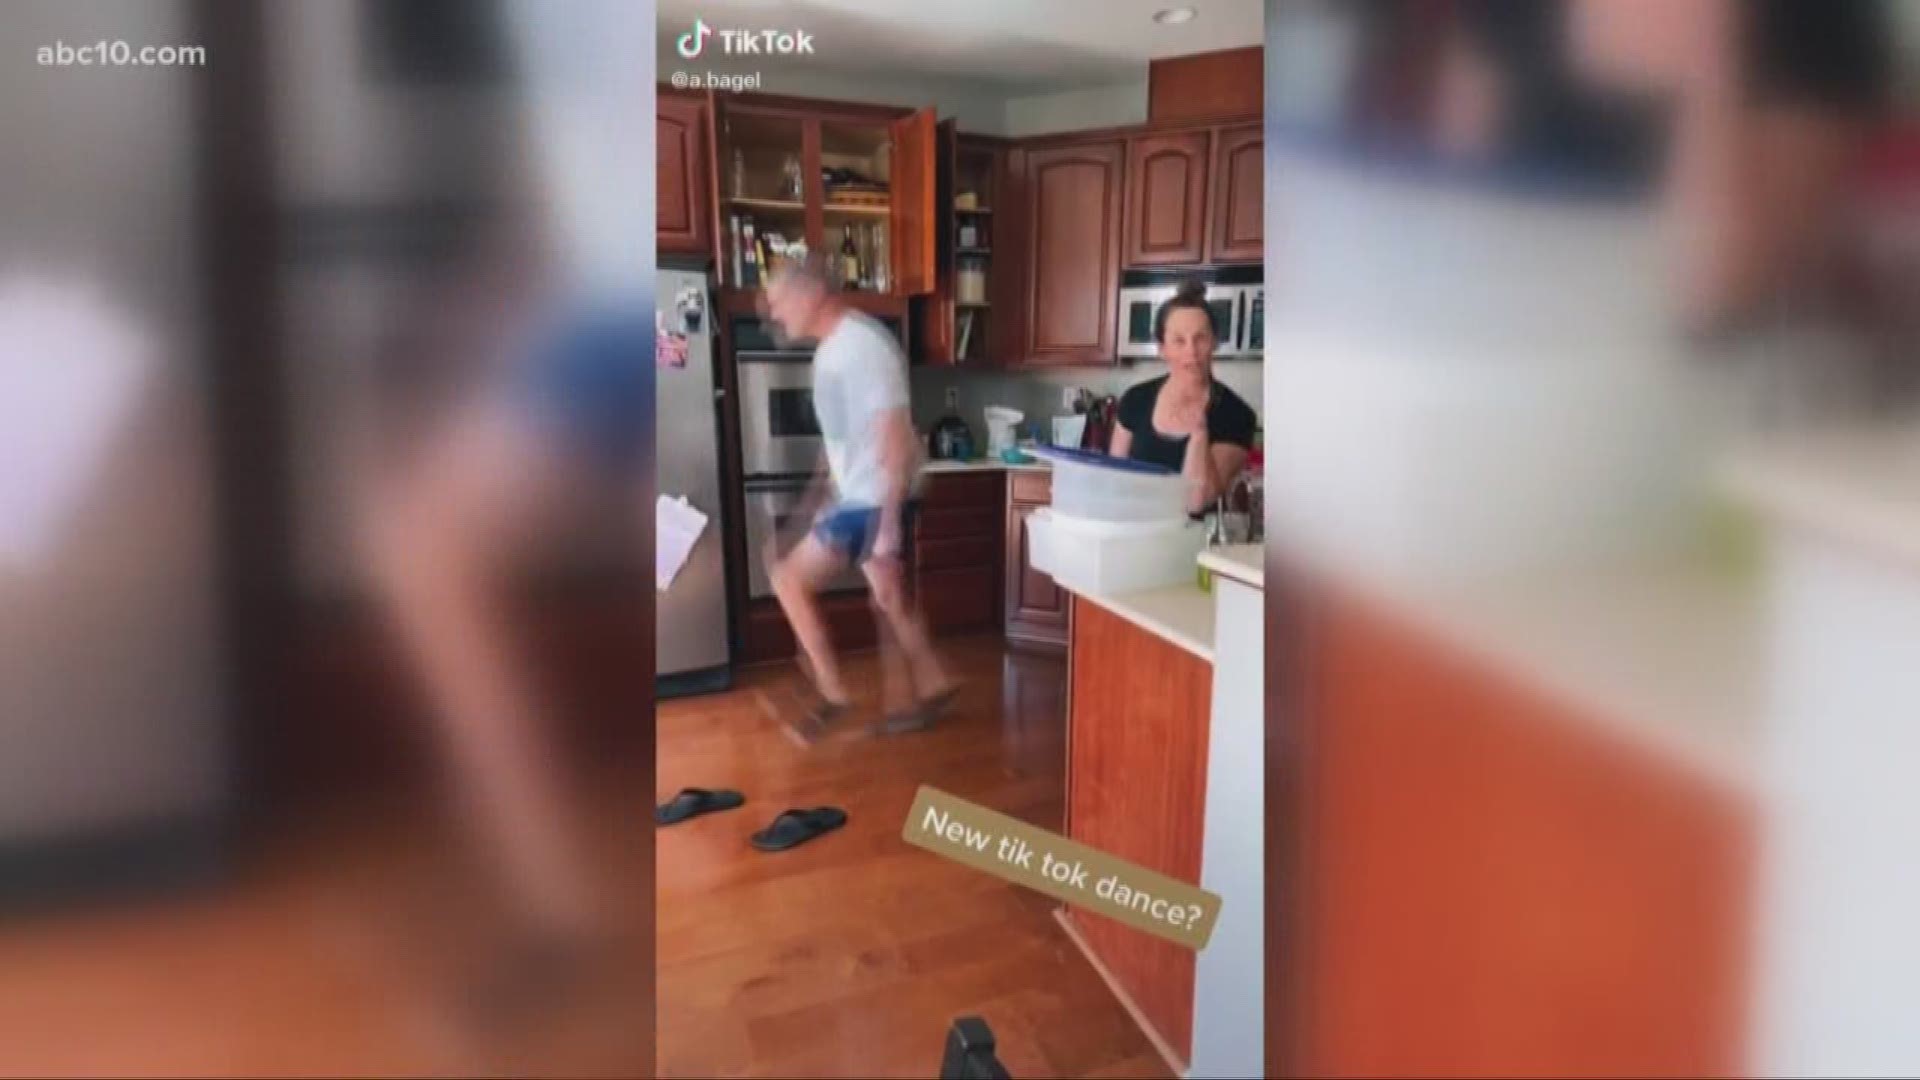 A family in Roseville is going "TikTok" famous after posting a now-viral video on the platform. Mark S. Allen caught up with the family about their new "fame."